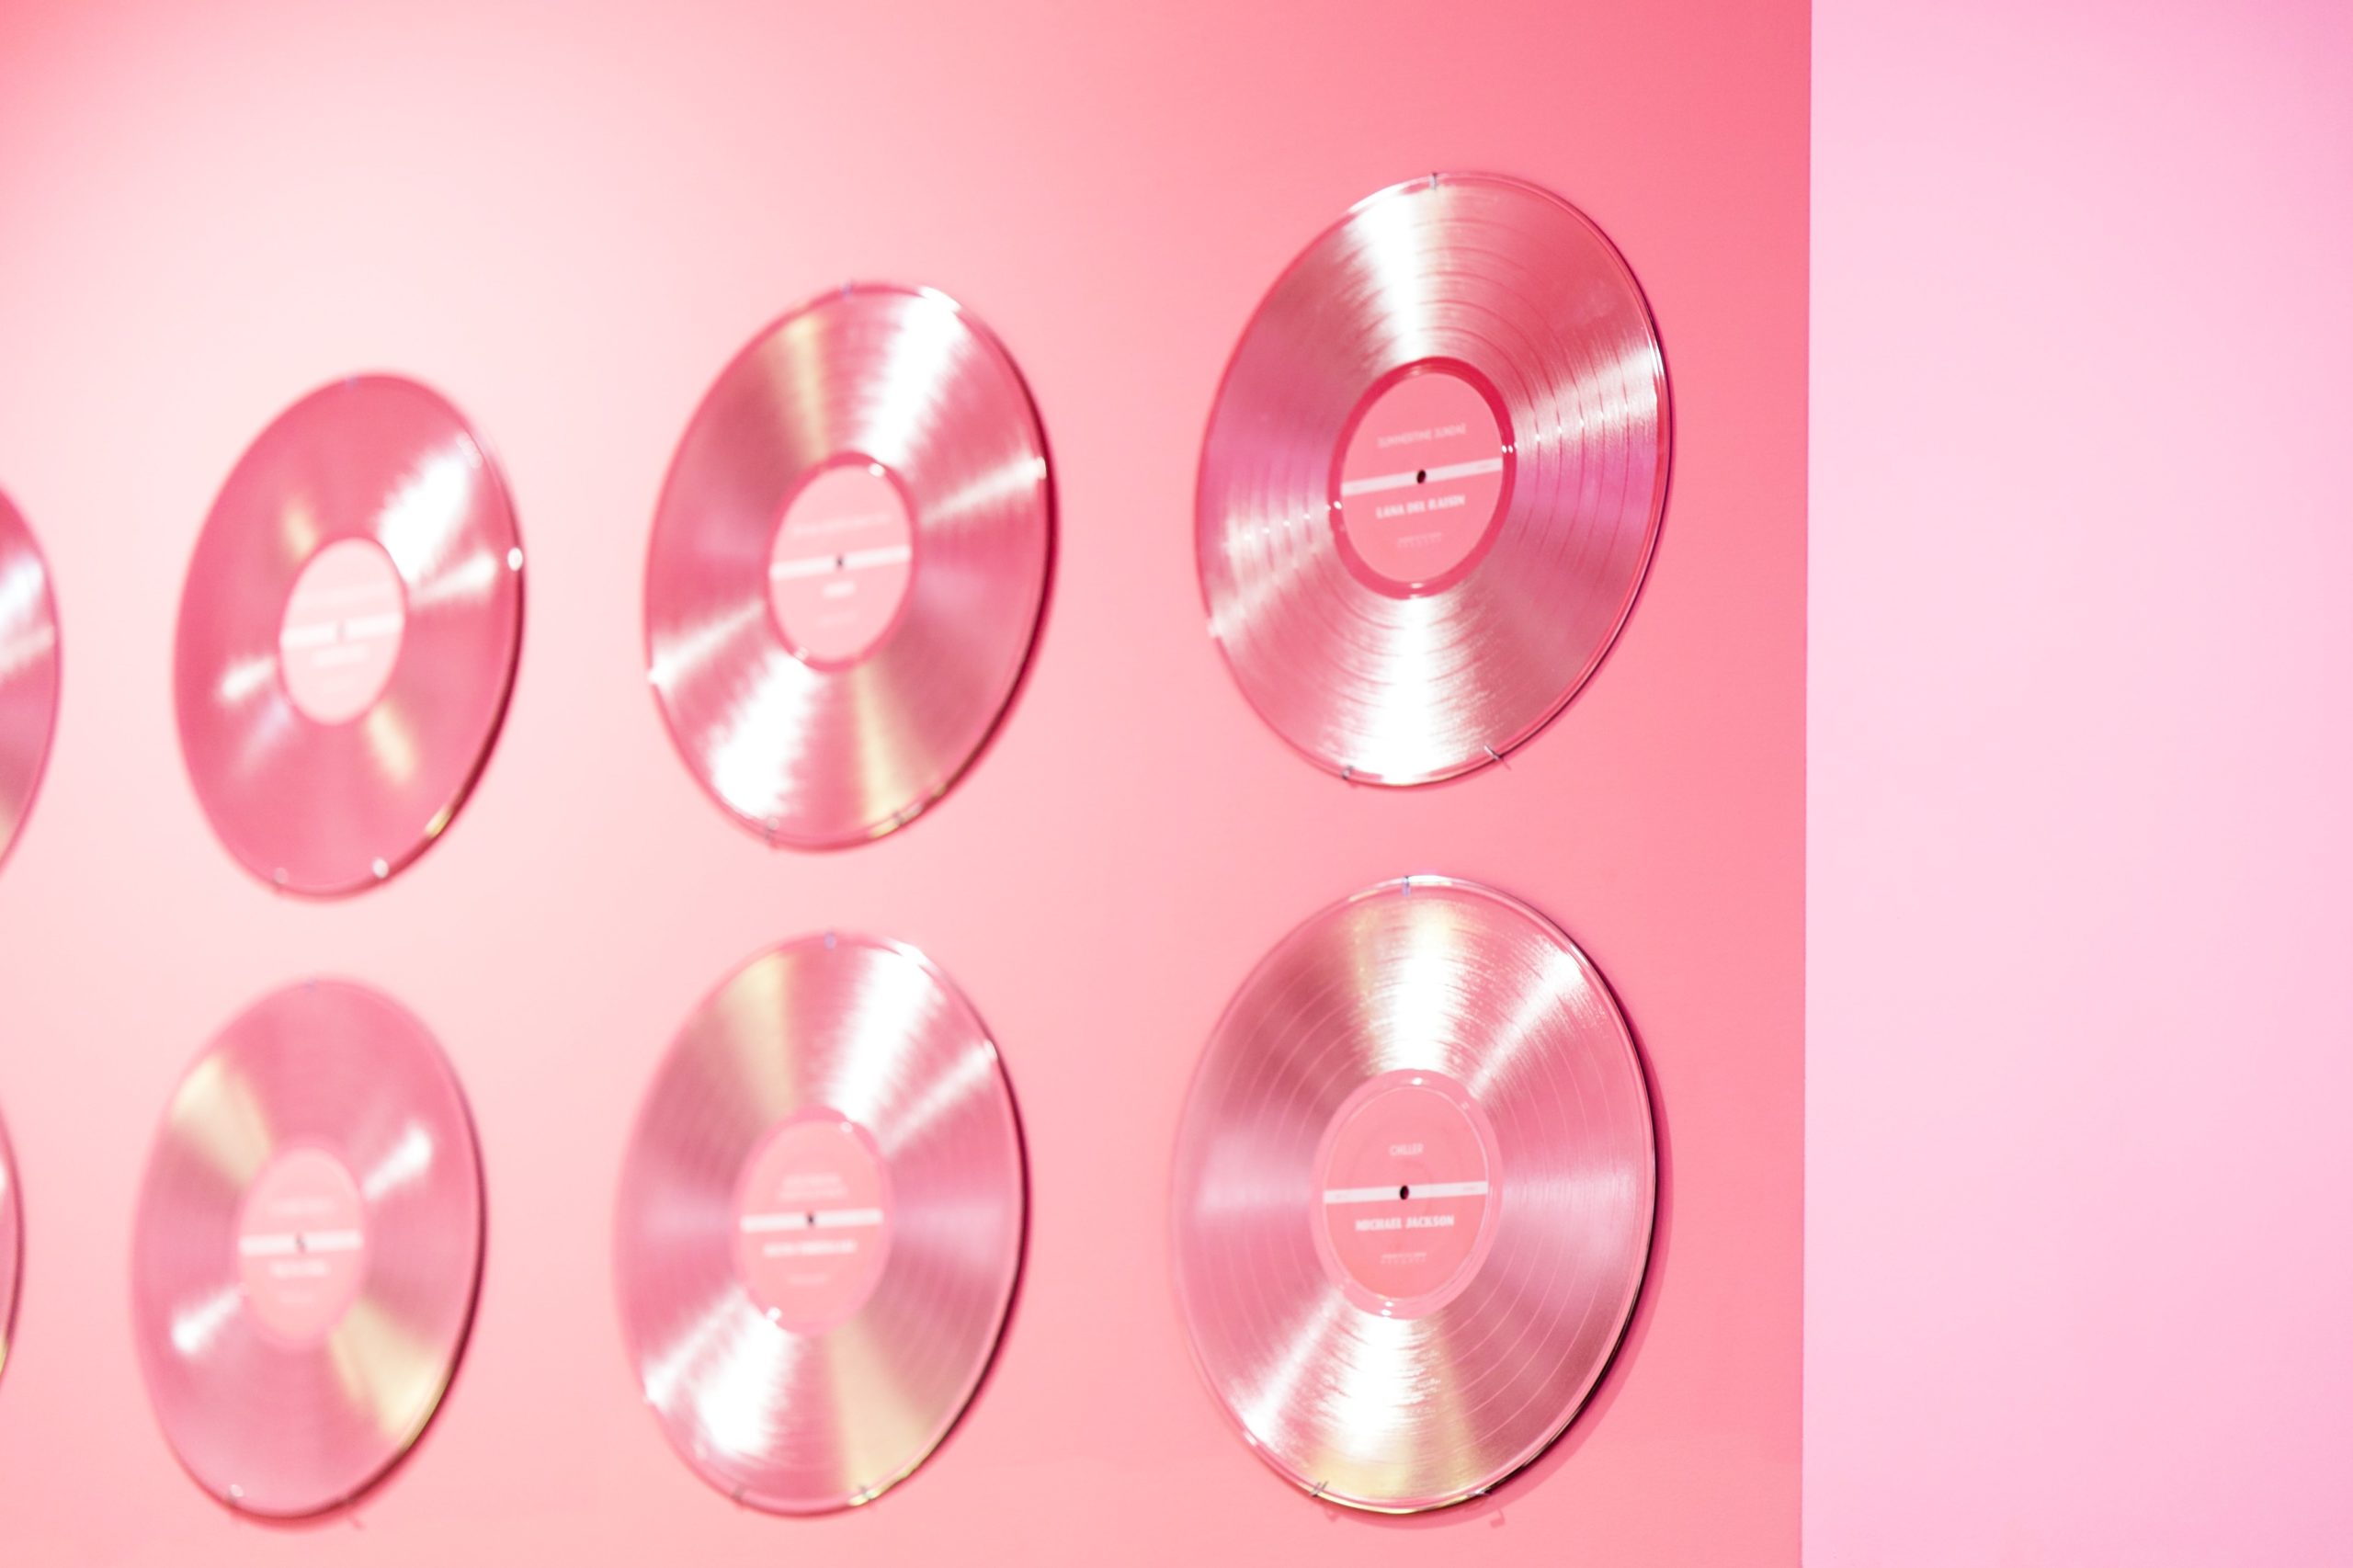 <img src="pink.jpg" alt="pink records on a pink wall"/> 